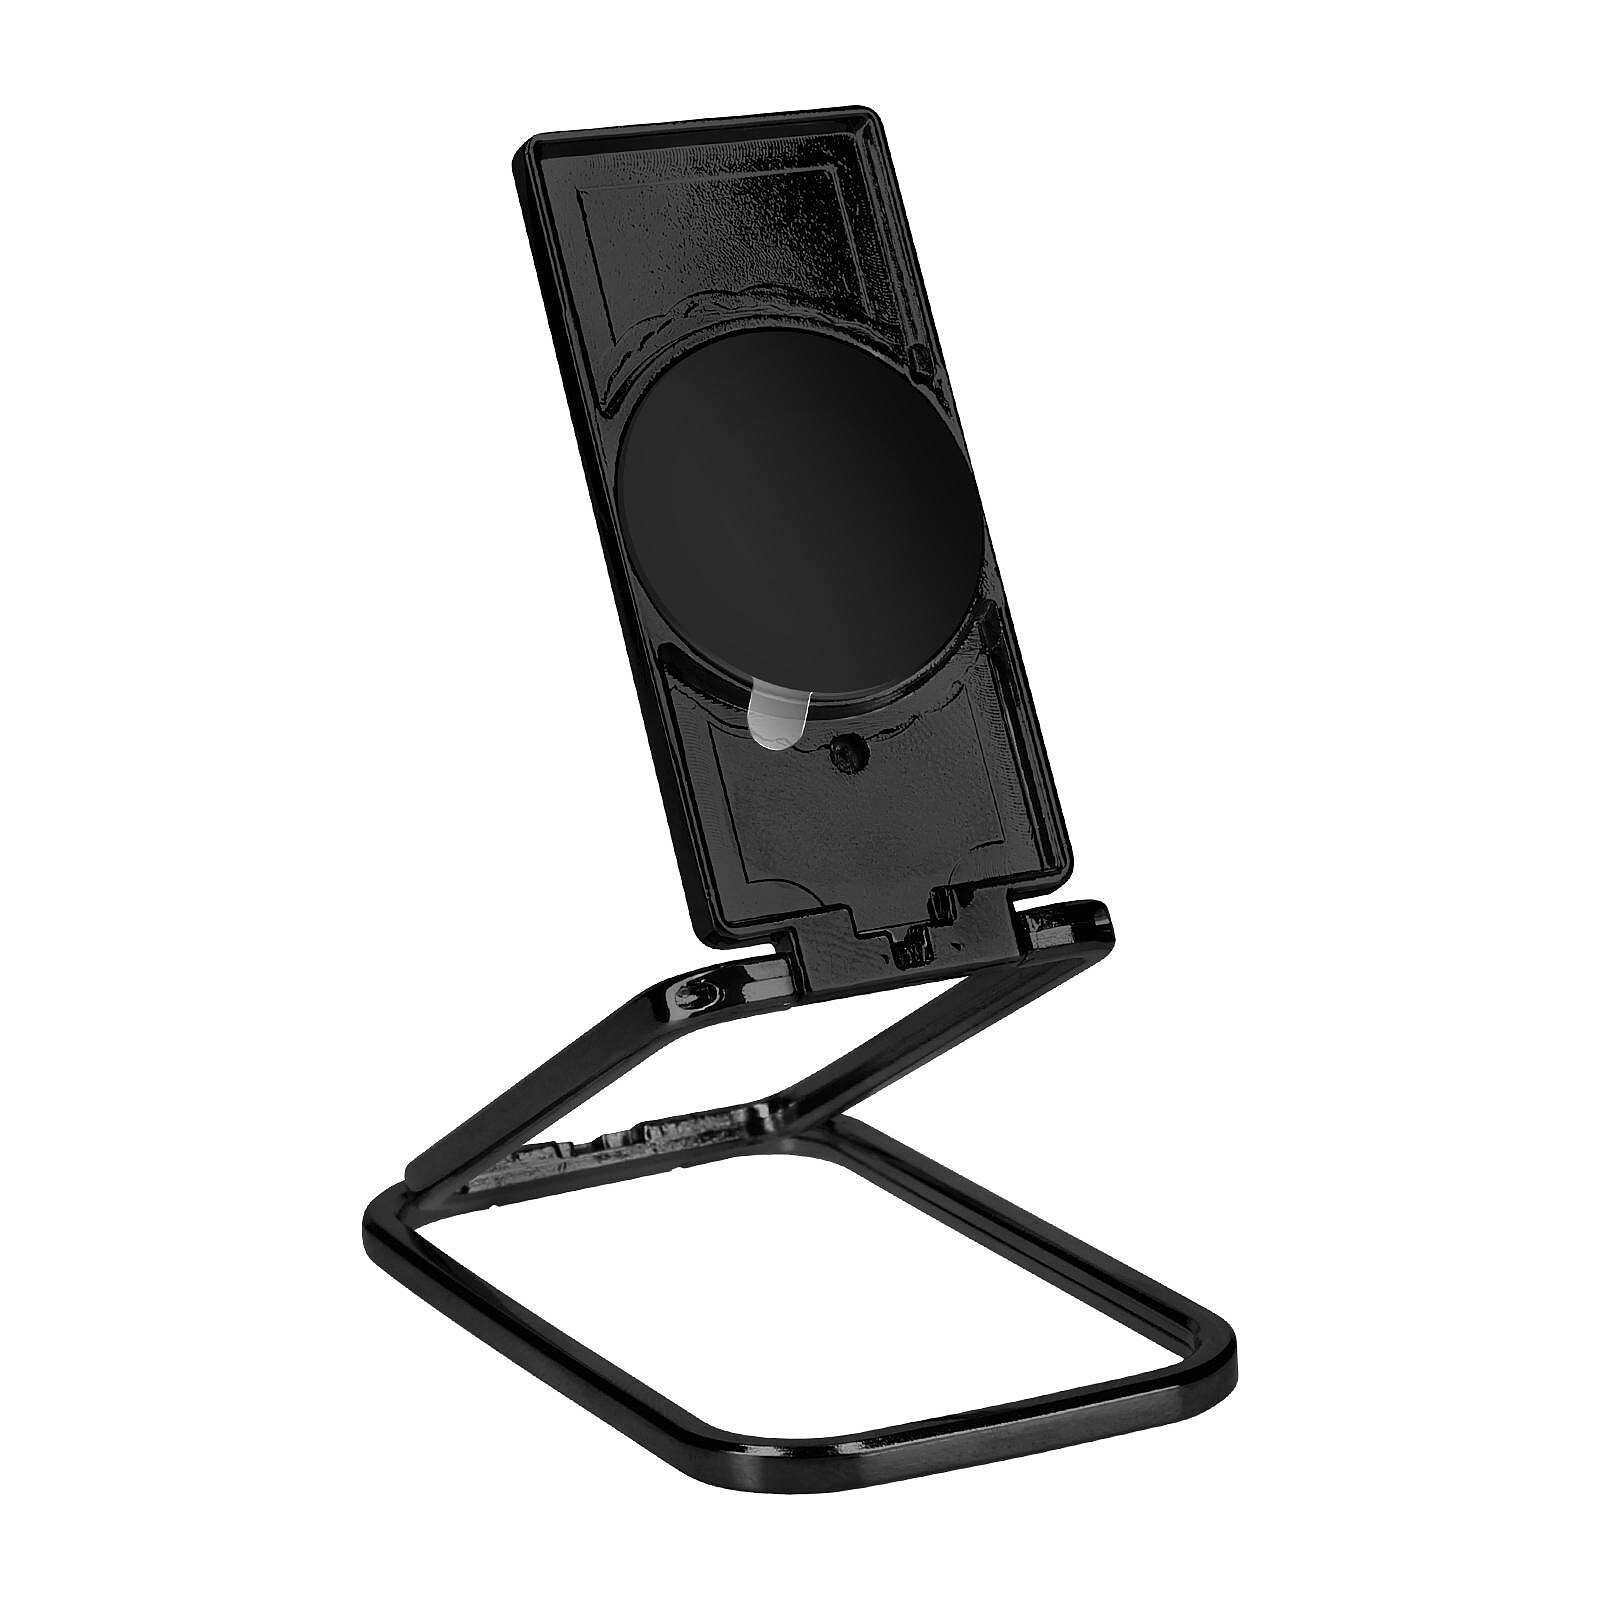 Cygnett MAGSTAND compatible iPad Pro 12.9 - Support tablette - LDLC